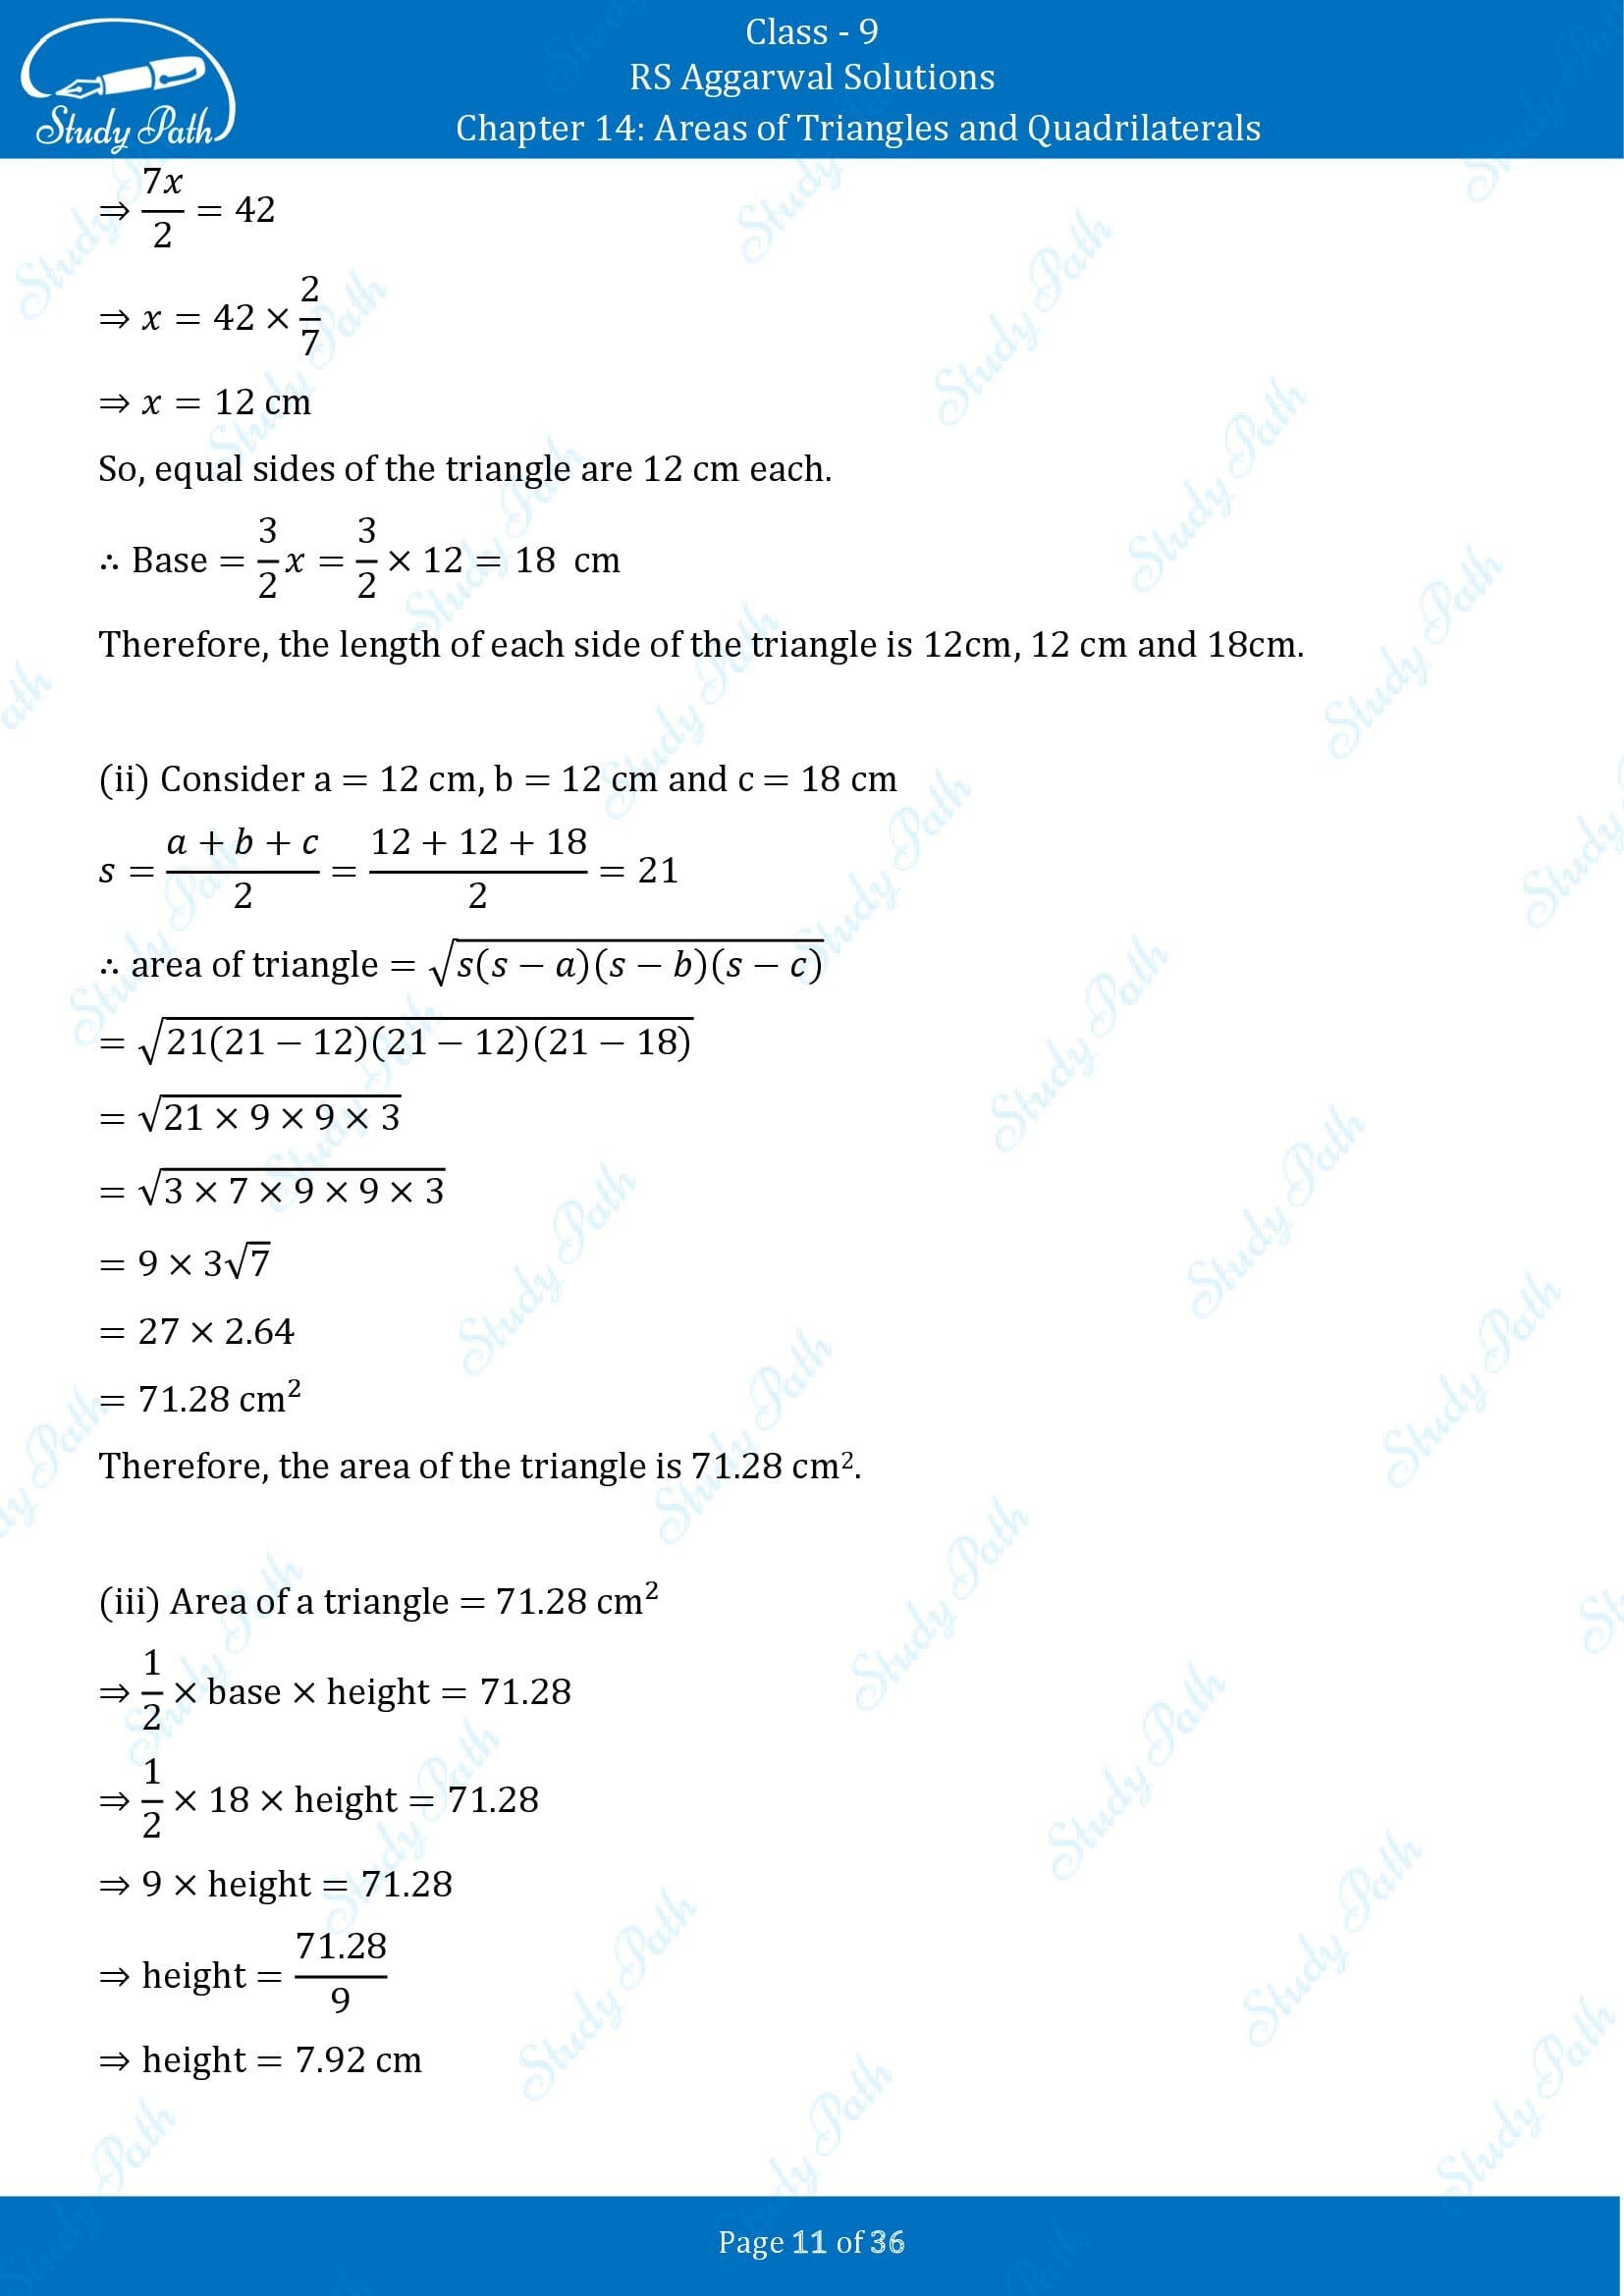 RS Aggarwal Solutions Class 9 Chapter 14 Areas of Triangles and Quadrilaterals Exercise 14 00011